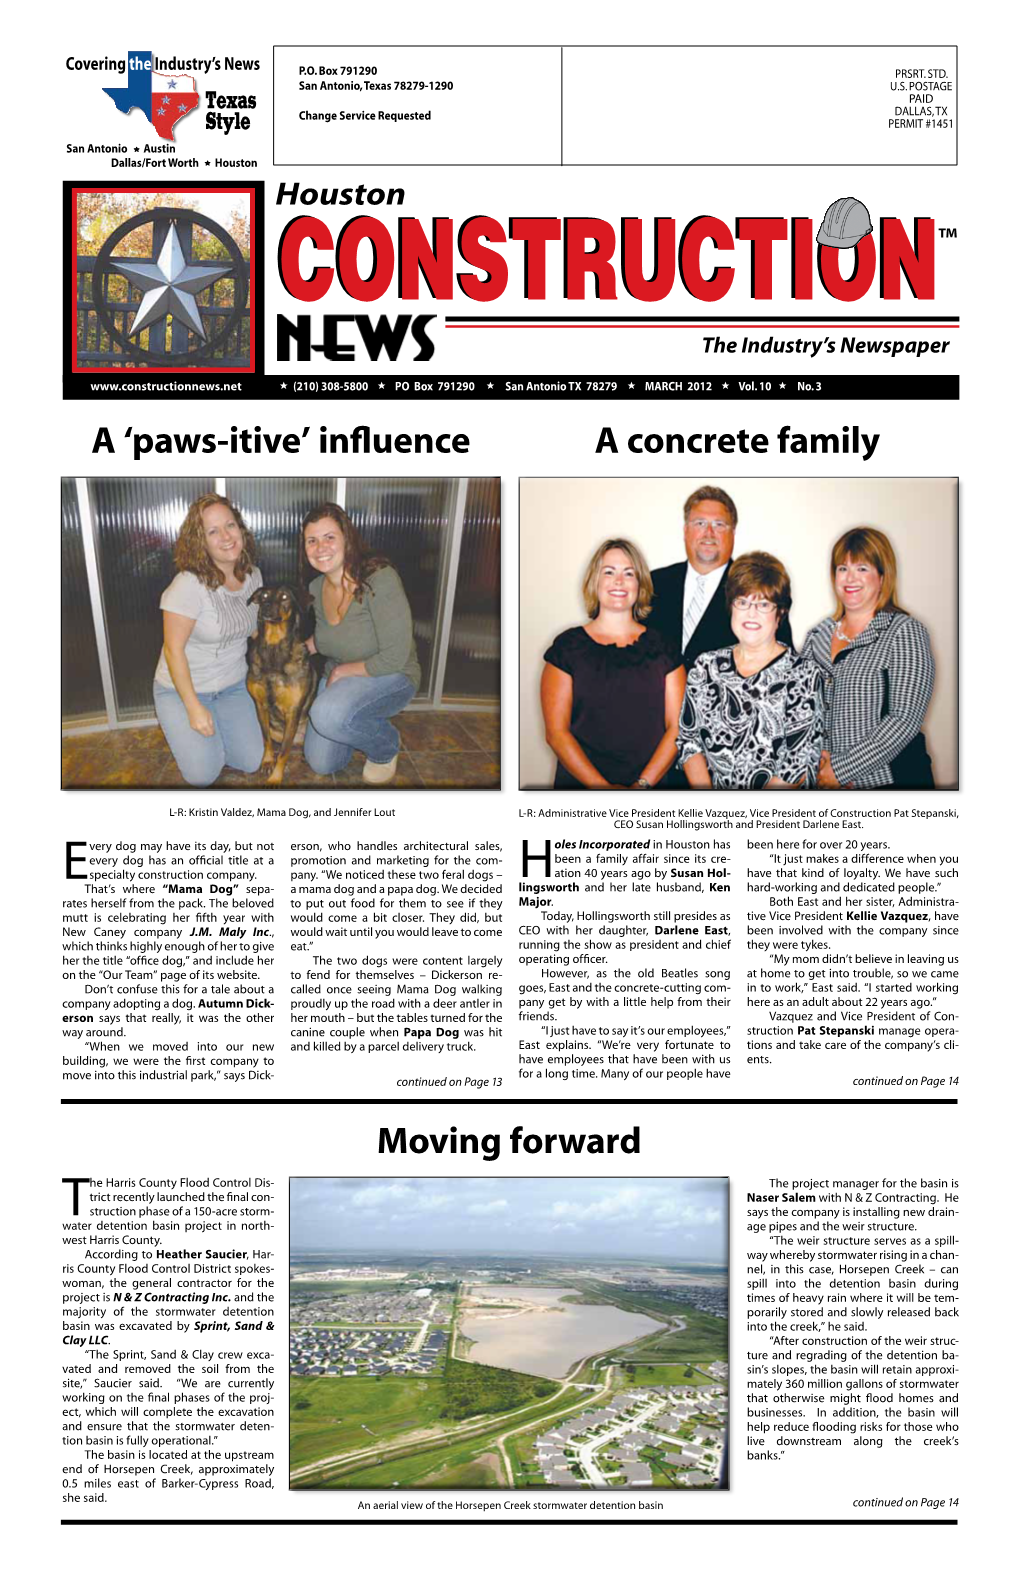 Houston CONSTRUCTIONCONSTRUCTION™ the Industry’S Newspaper